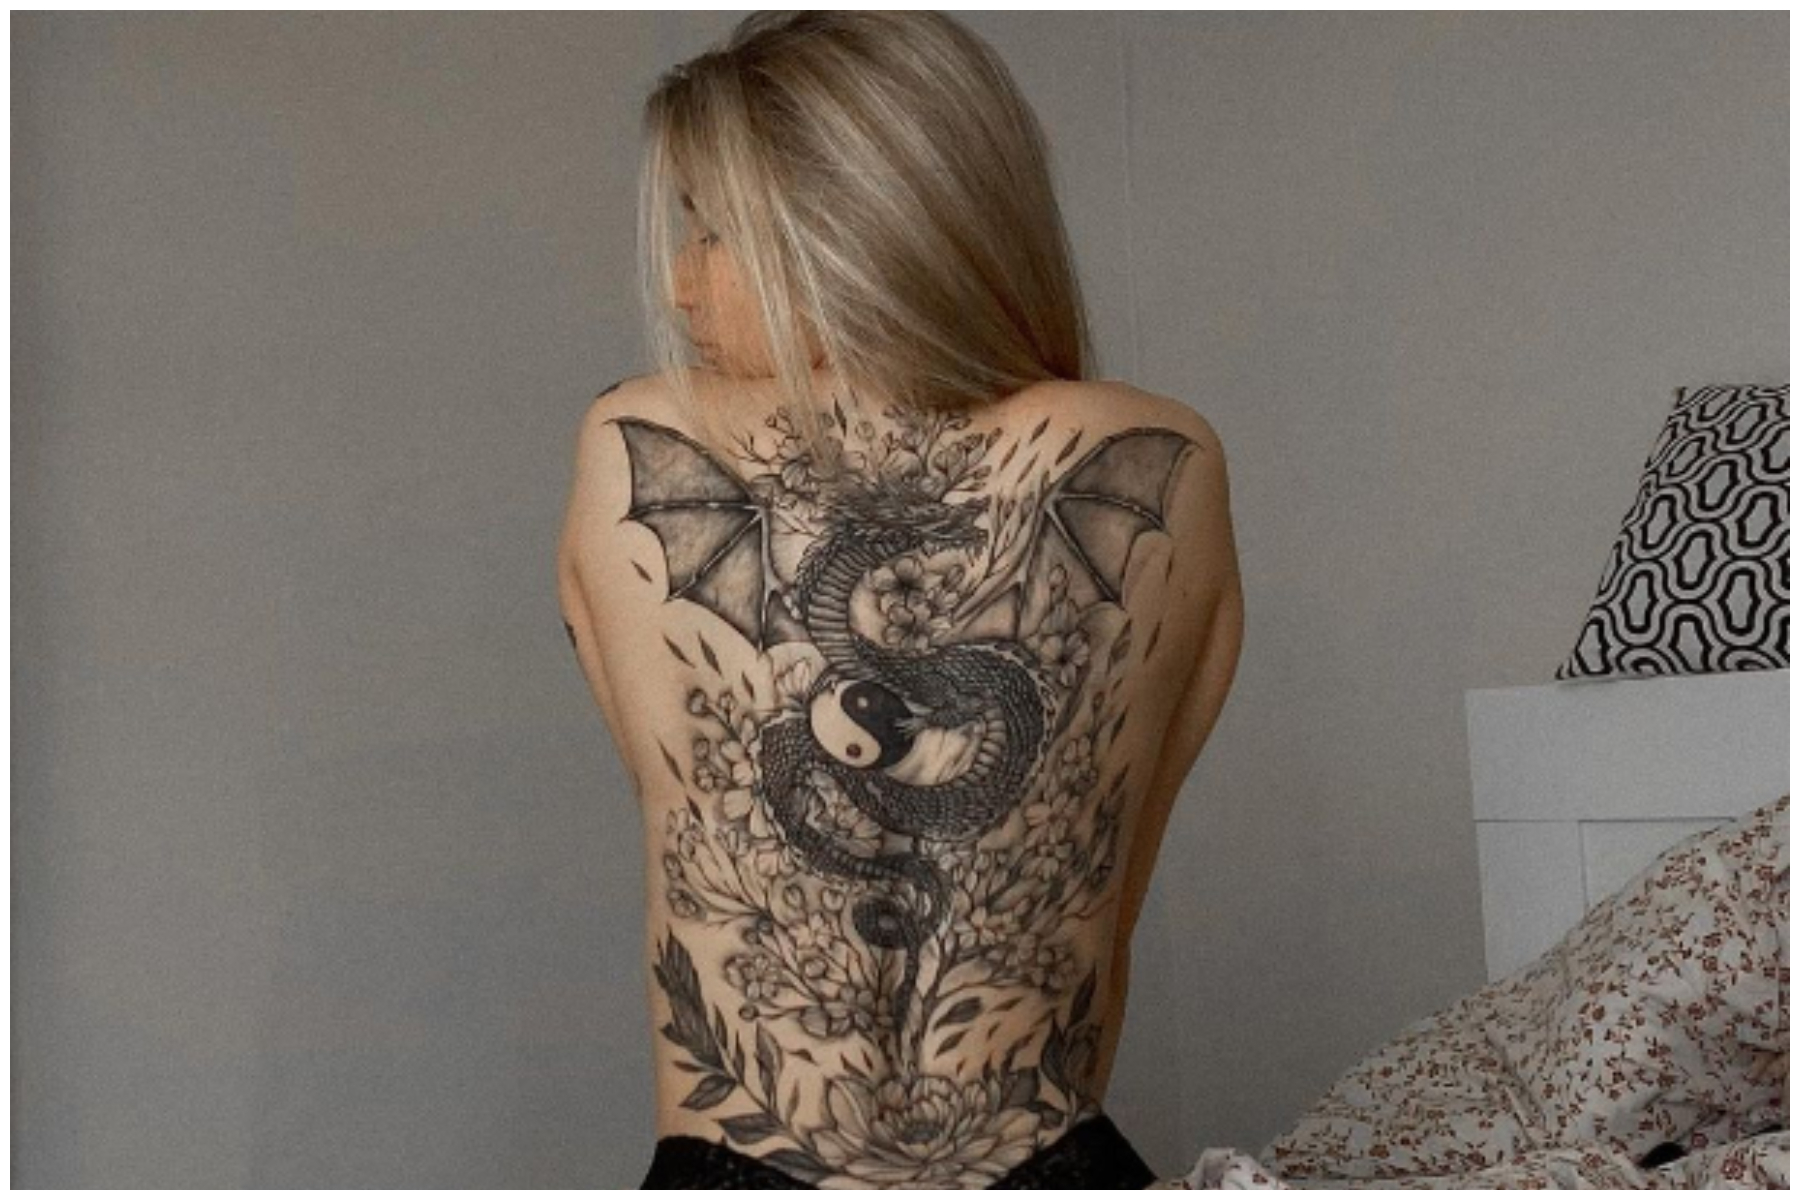 Promiscuous Girl Or Average Jane? Women With Tattoos Perceived As Slightly  More Sexually Active